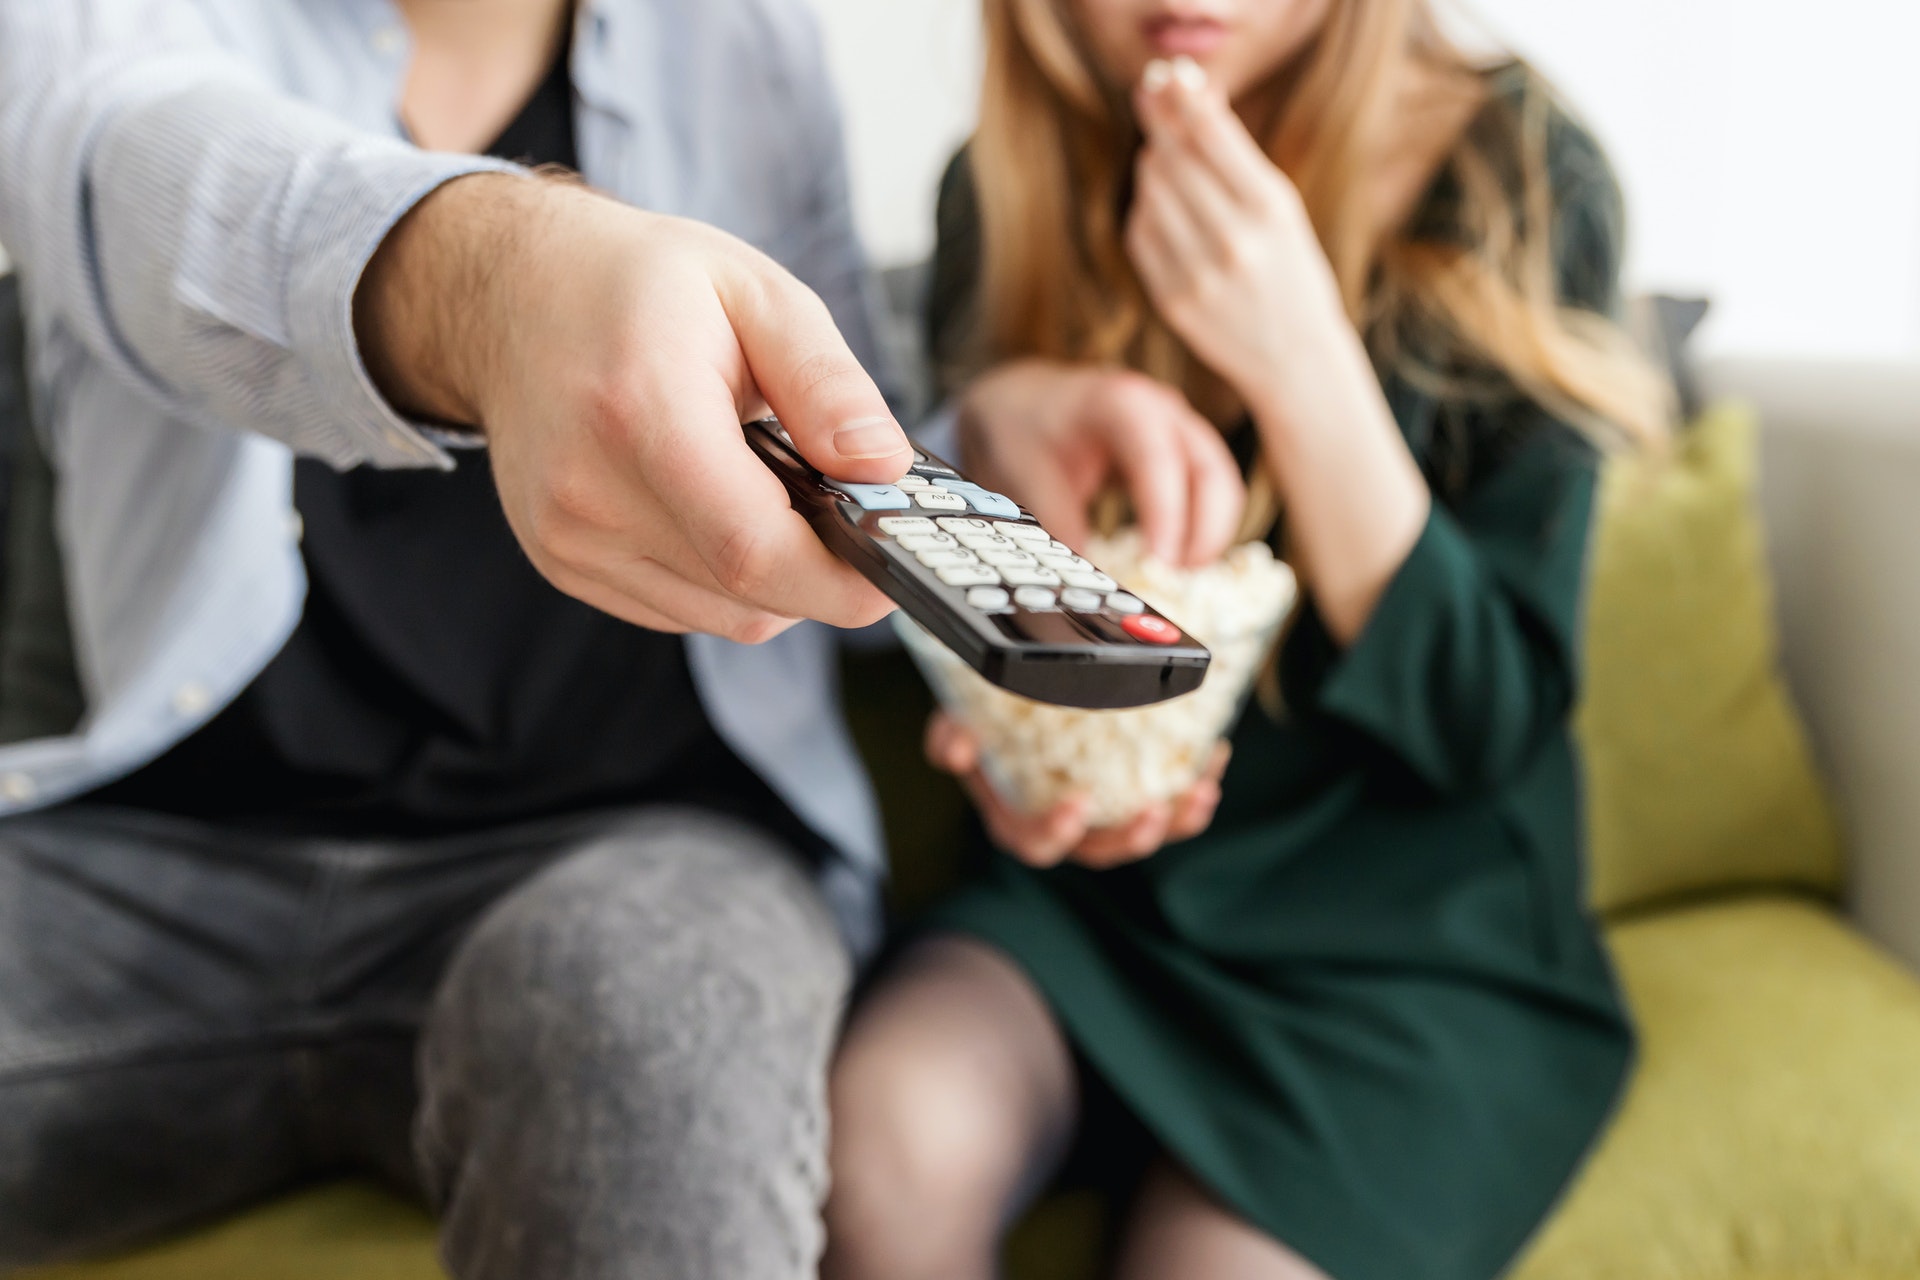 man sitting on couch next to woman holding tv remote and bowl of popcorn